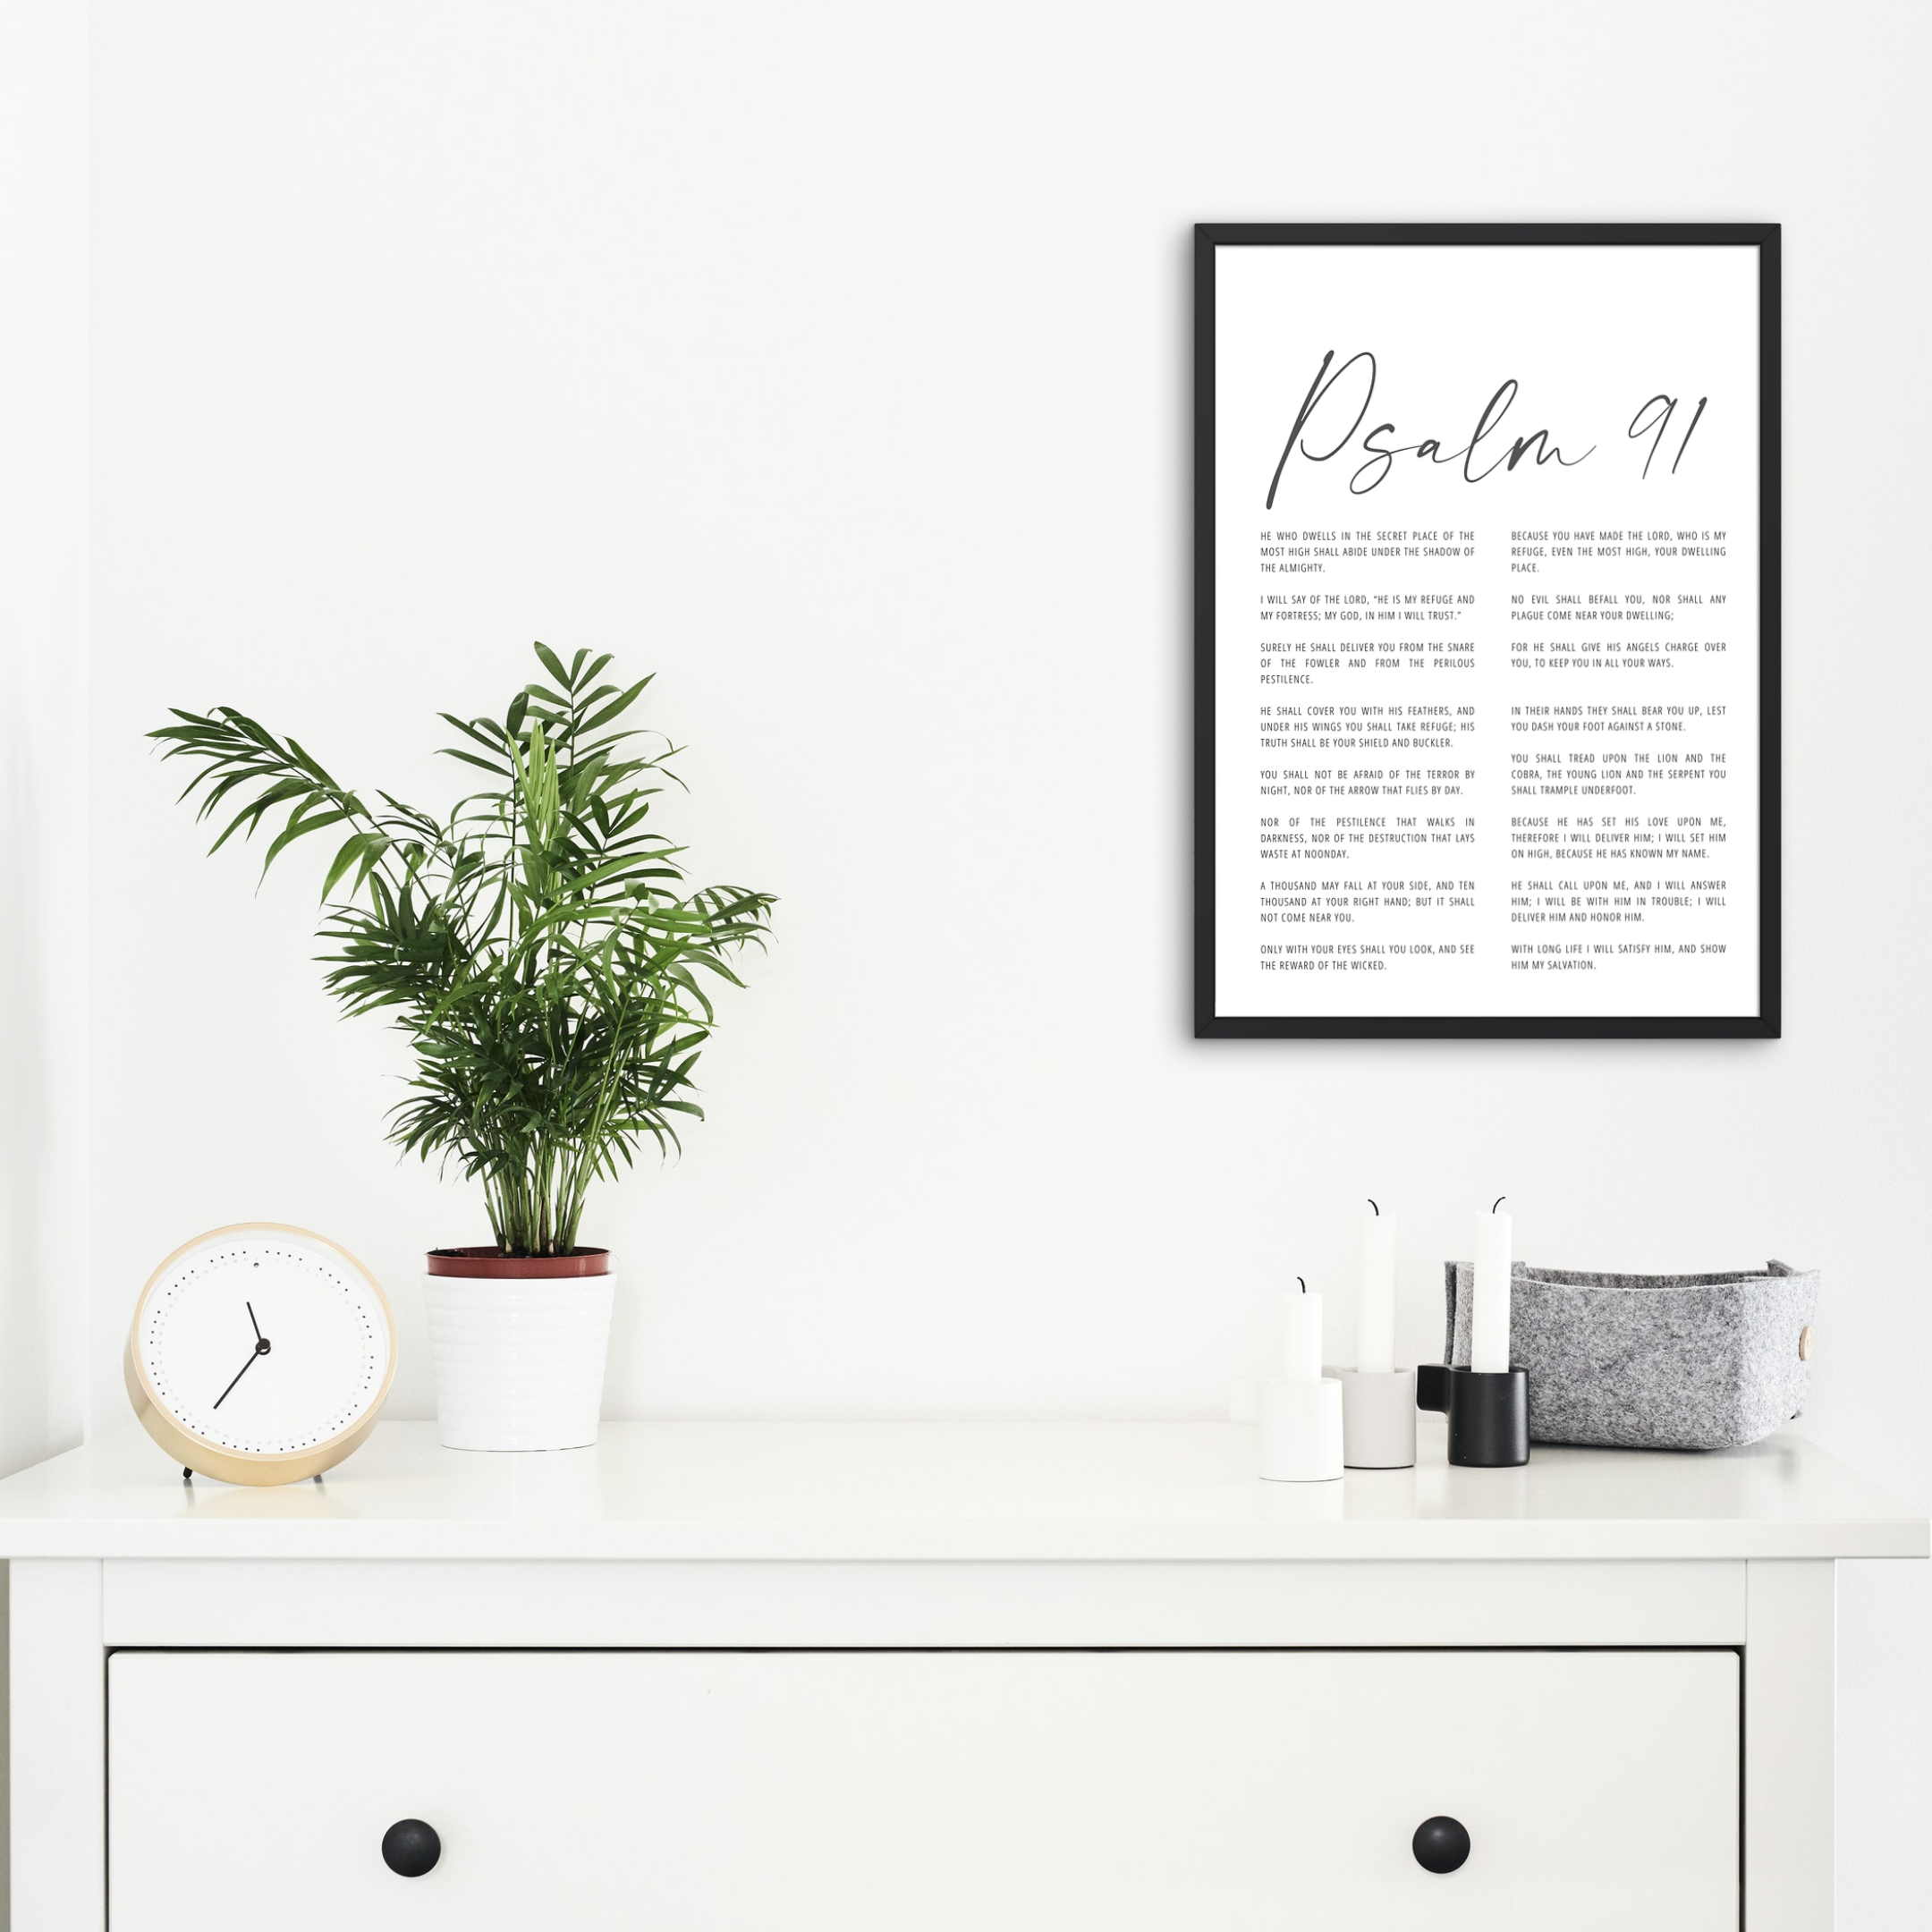 ROCKONLINE | Psalm 91 A3 Print in Black Frame by His Fruitful Vine | Home Decor | Wall Frame | New Creation Church | NCC | Joseph Prince | ROCK Bookshop | ROCK Bookstore | Star Vista | Lifestyle | Reminders | Gift Ideas | Scriptures | Free delivery for Singapore Orders above $50.